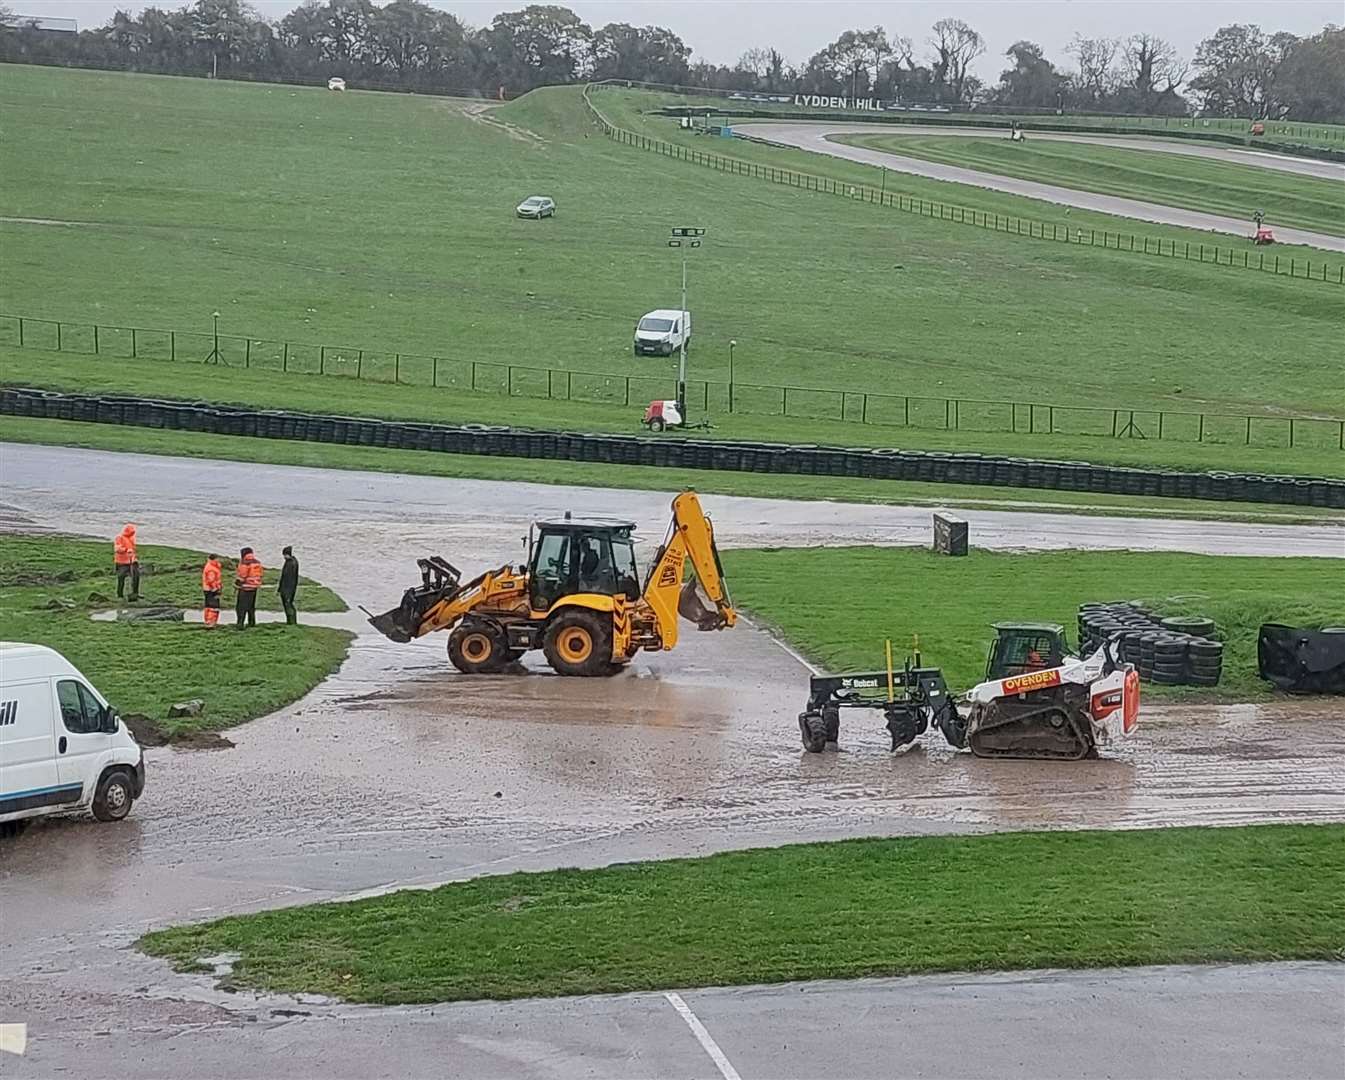 Lydden staff "worked tirelessly" to clear the circuit but Sunday's event was abandoned at about 10.30am